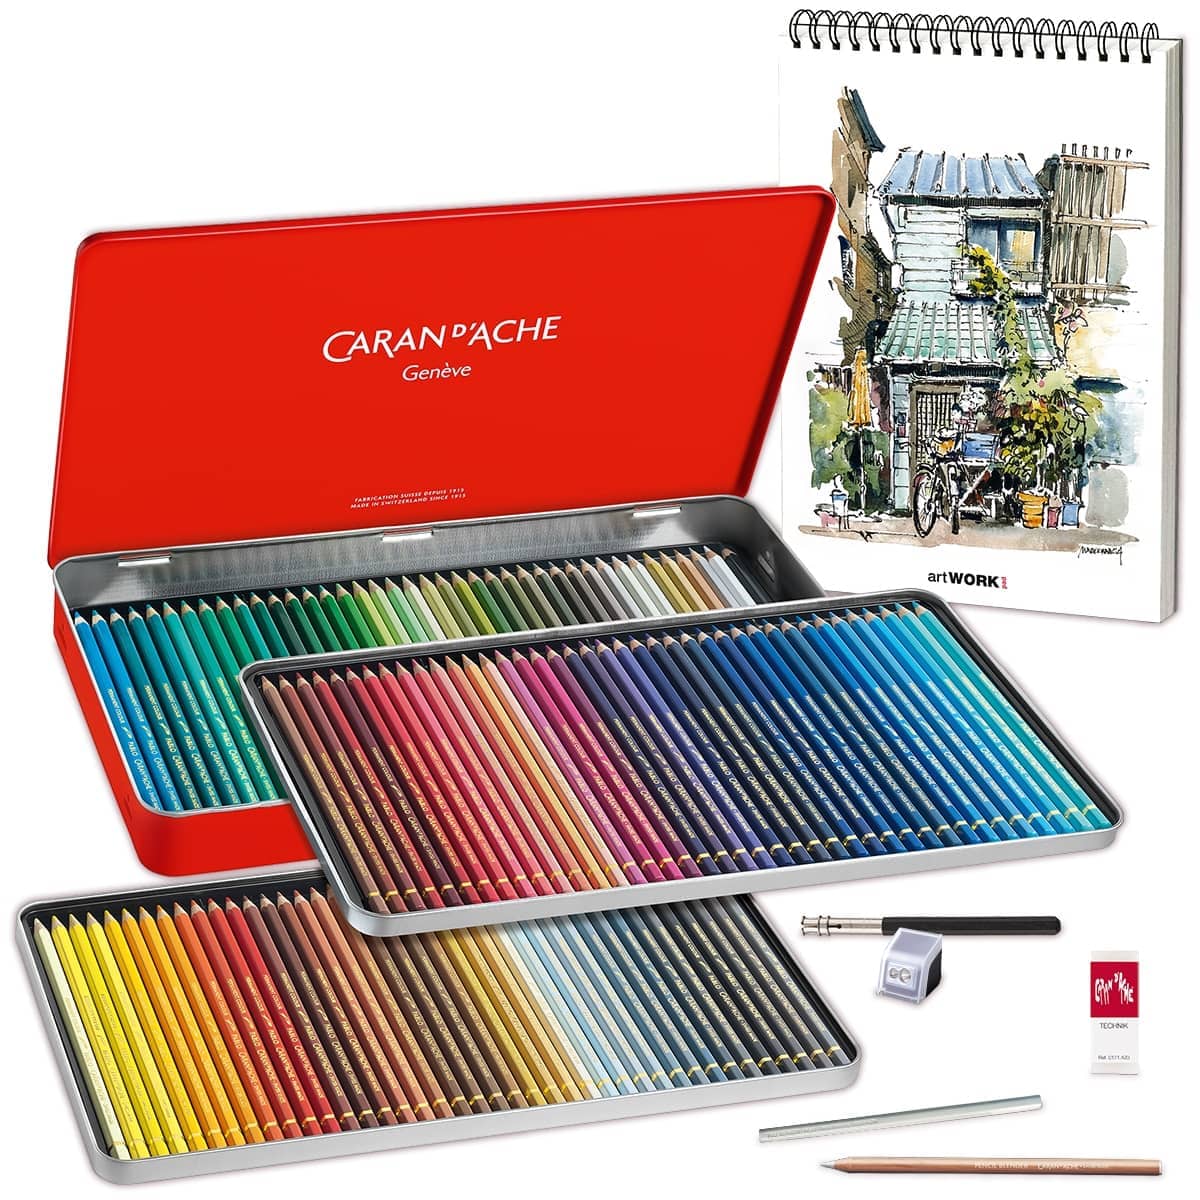 Caran D'Ache Pablo Artist Pencils Pack of 80-1 Day Despatch With TNT Next Day! 